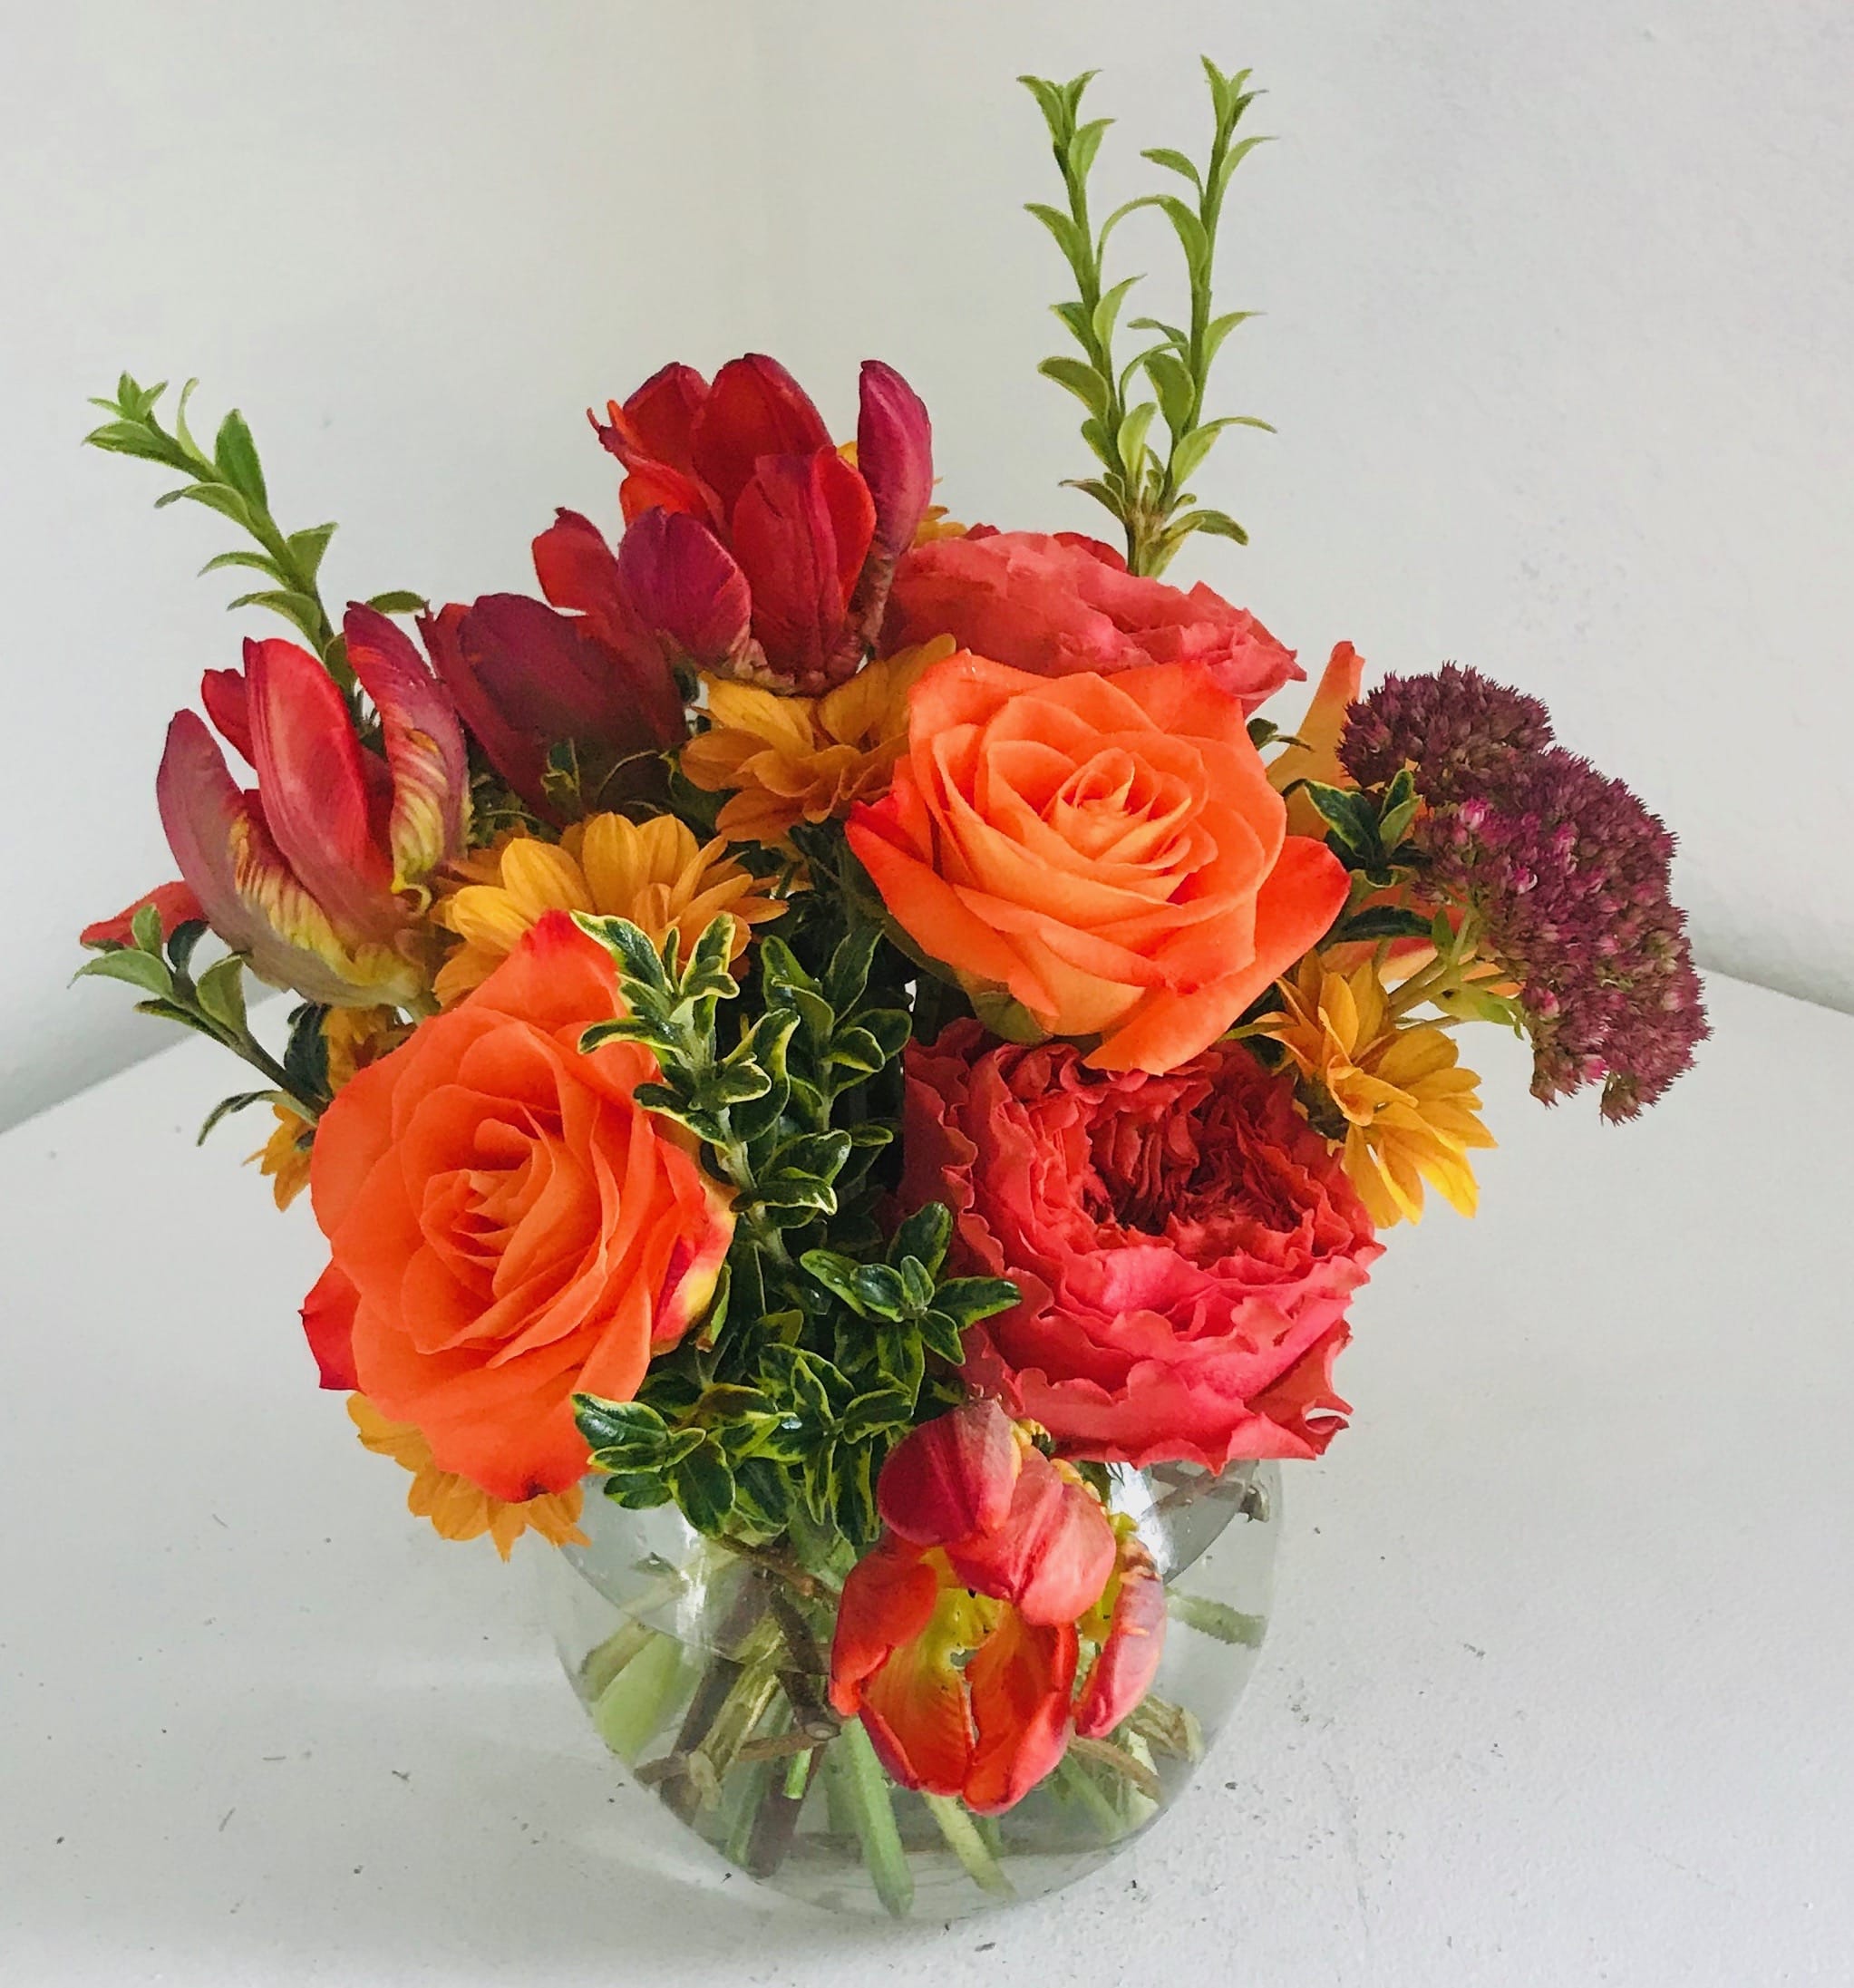 Bowl of Beauty - Intense colors of roses and other premium flowers